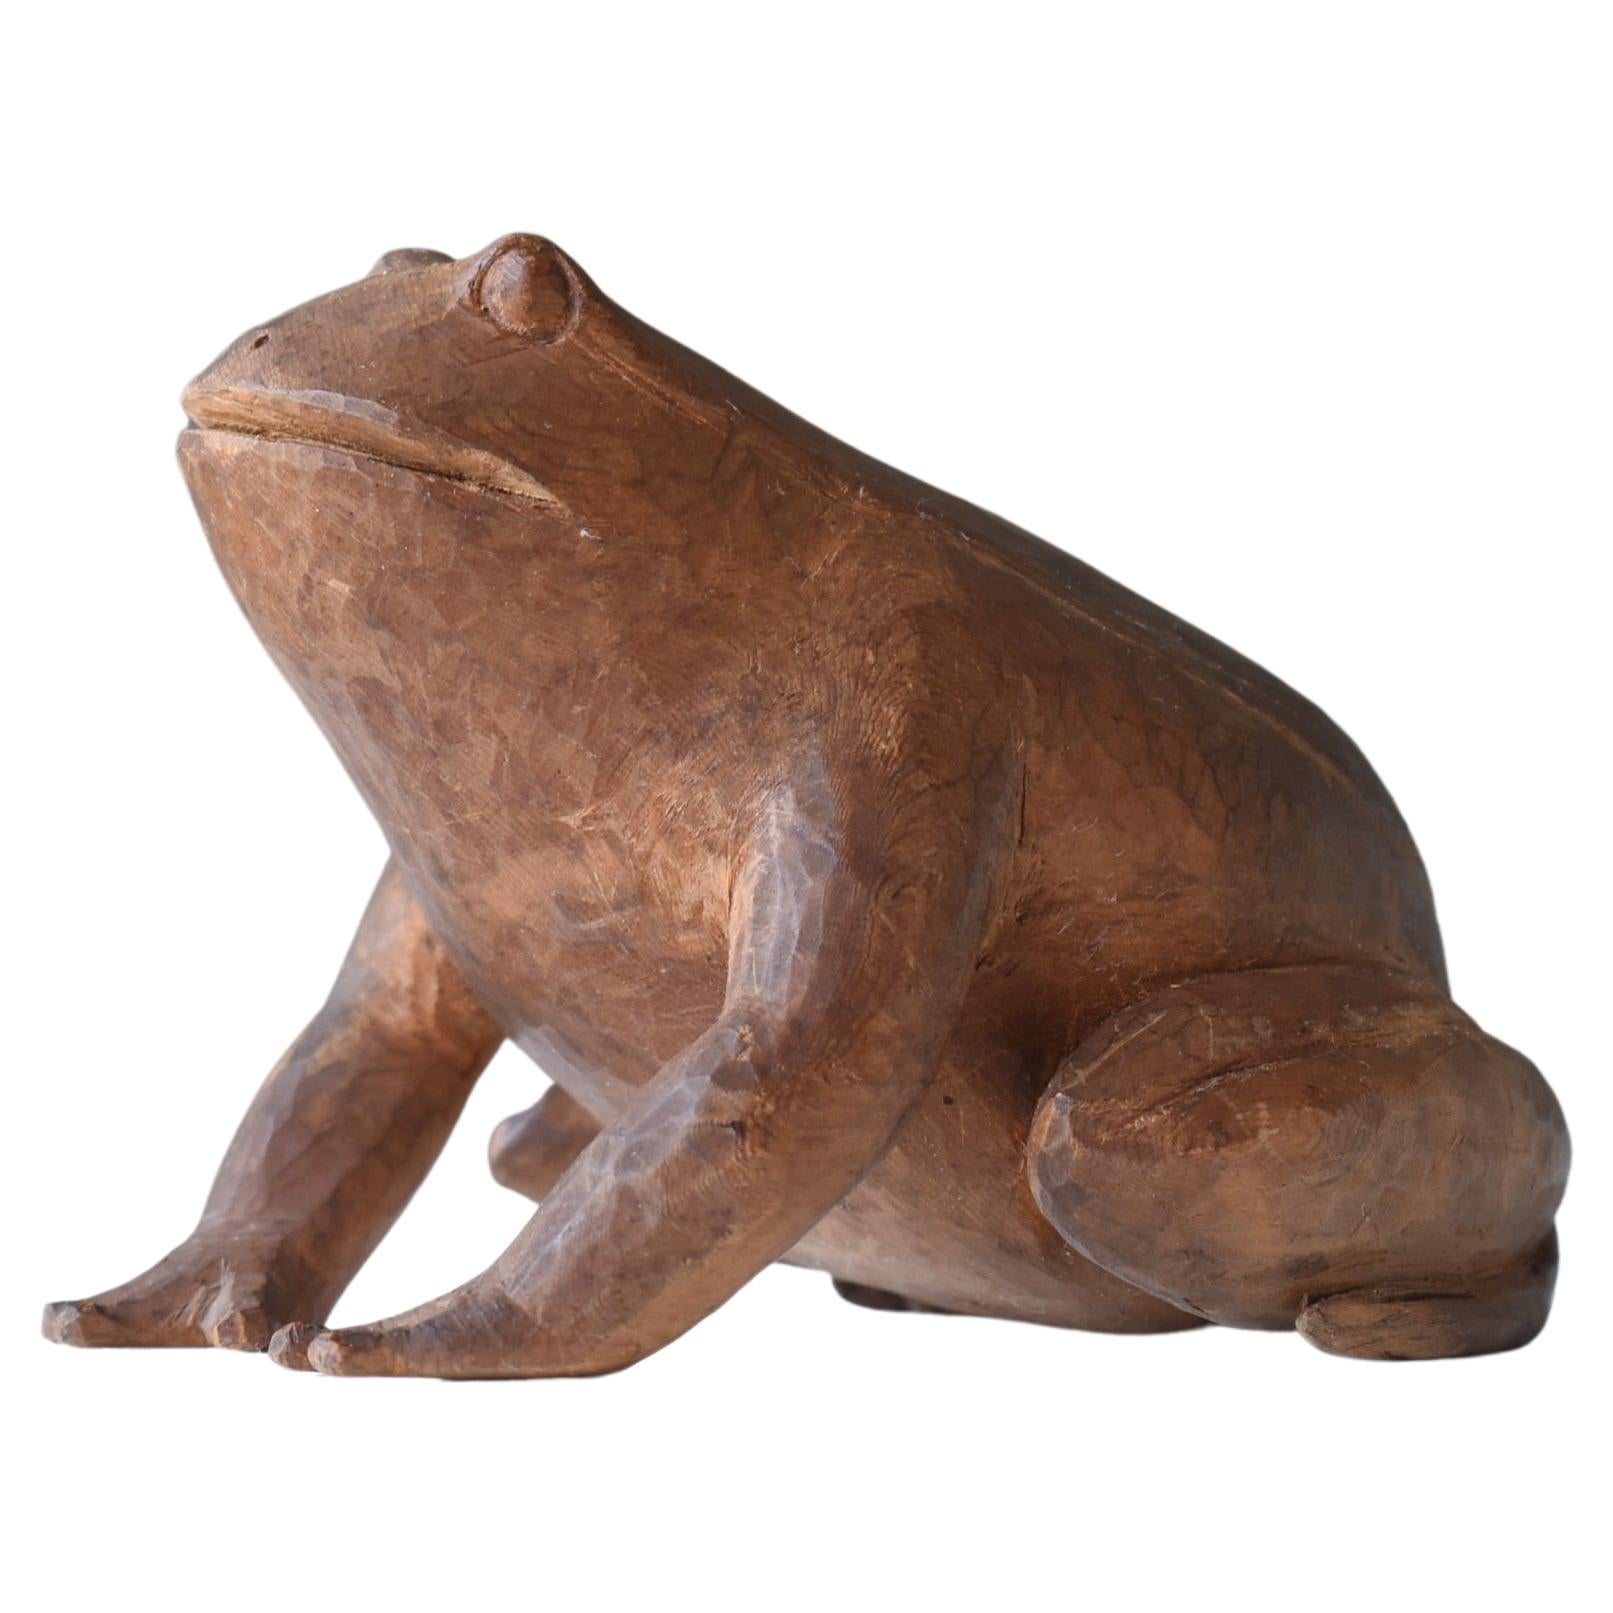 Japanese Antique Wood Carving Frog 1860s-1920s/sculpture Mingei Object